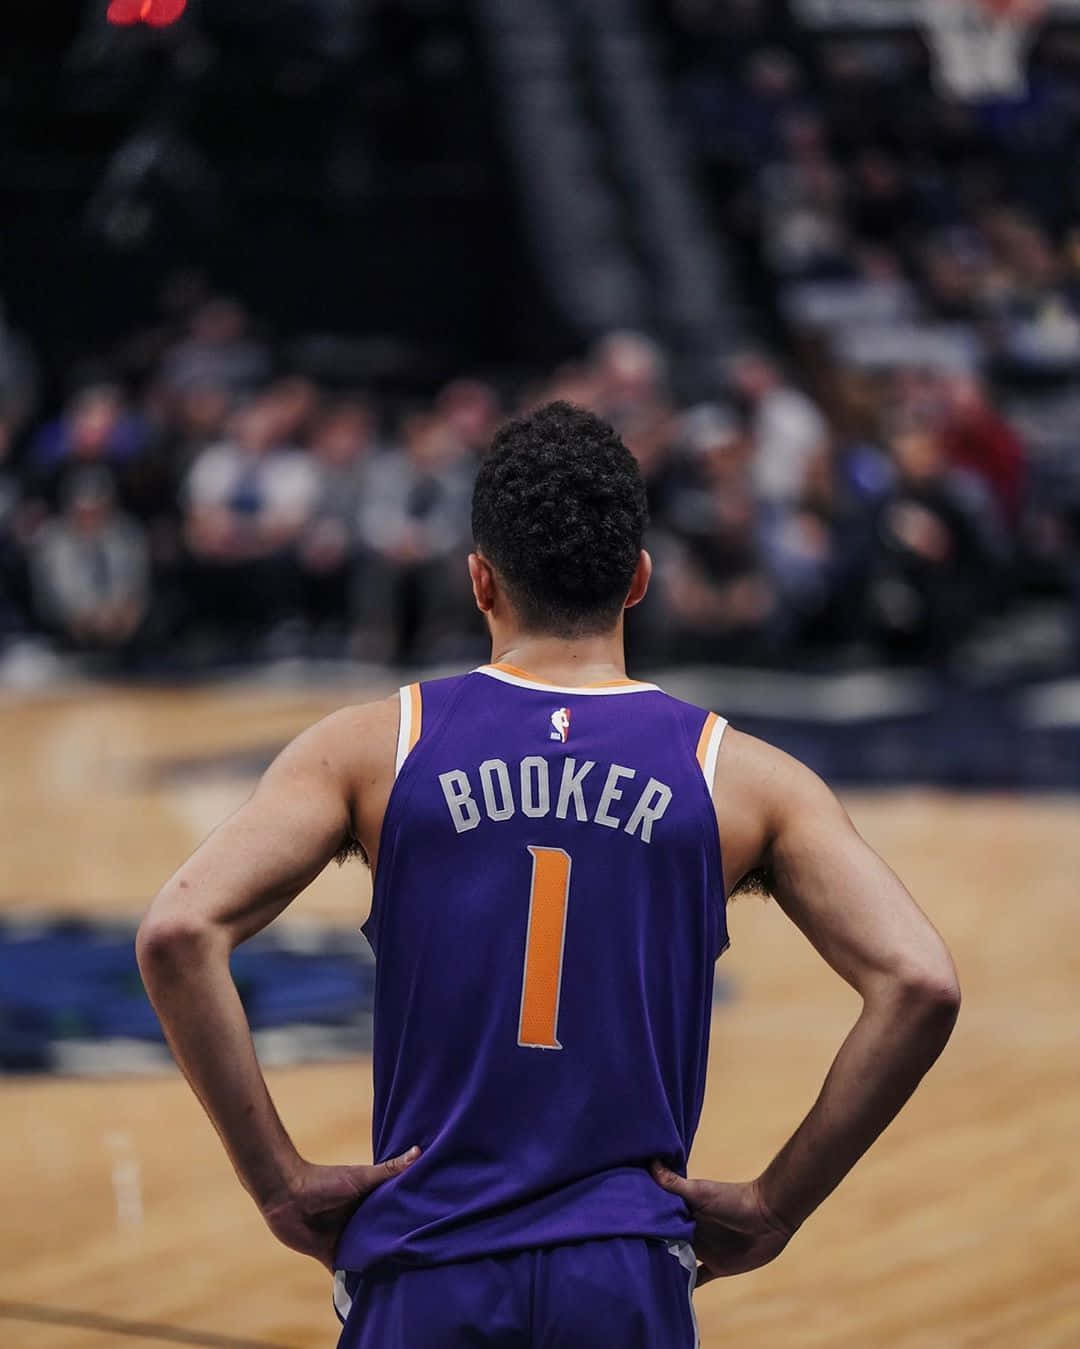 GAMEDAY! Here's a Devin Booker phone wallpaper for you. Should fit